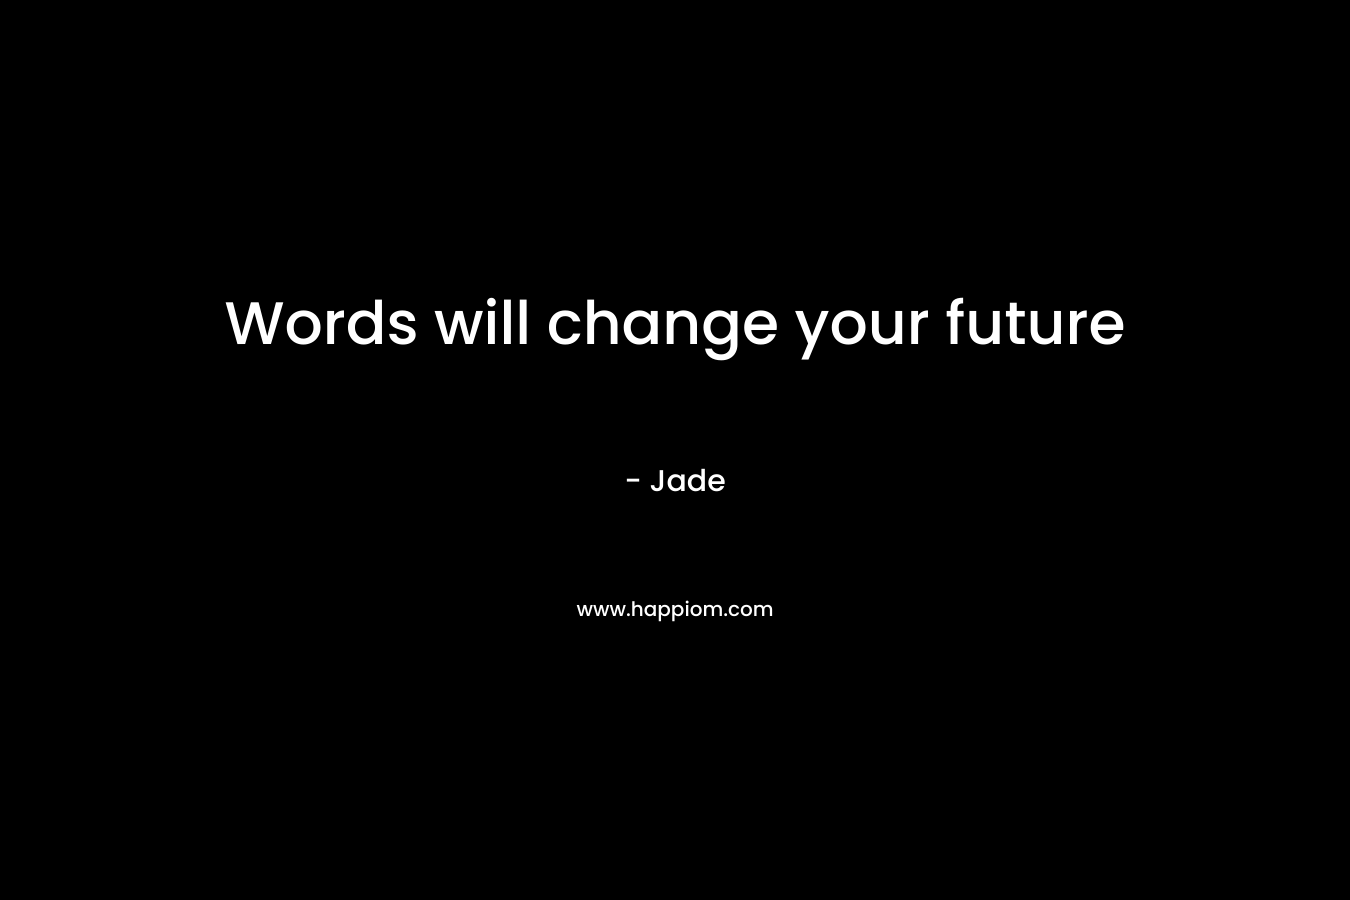 Words will change your future